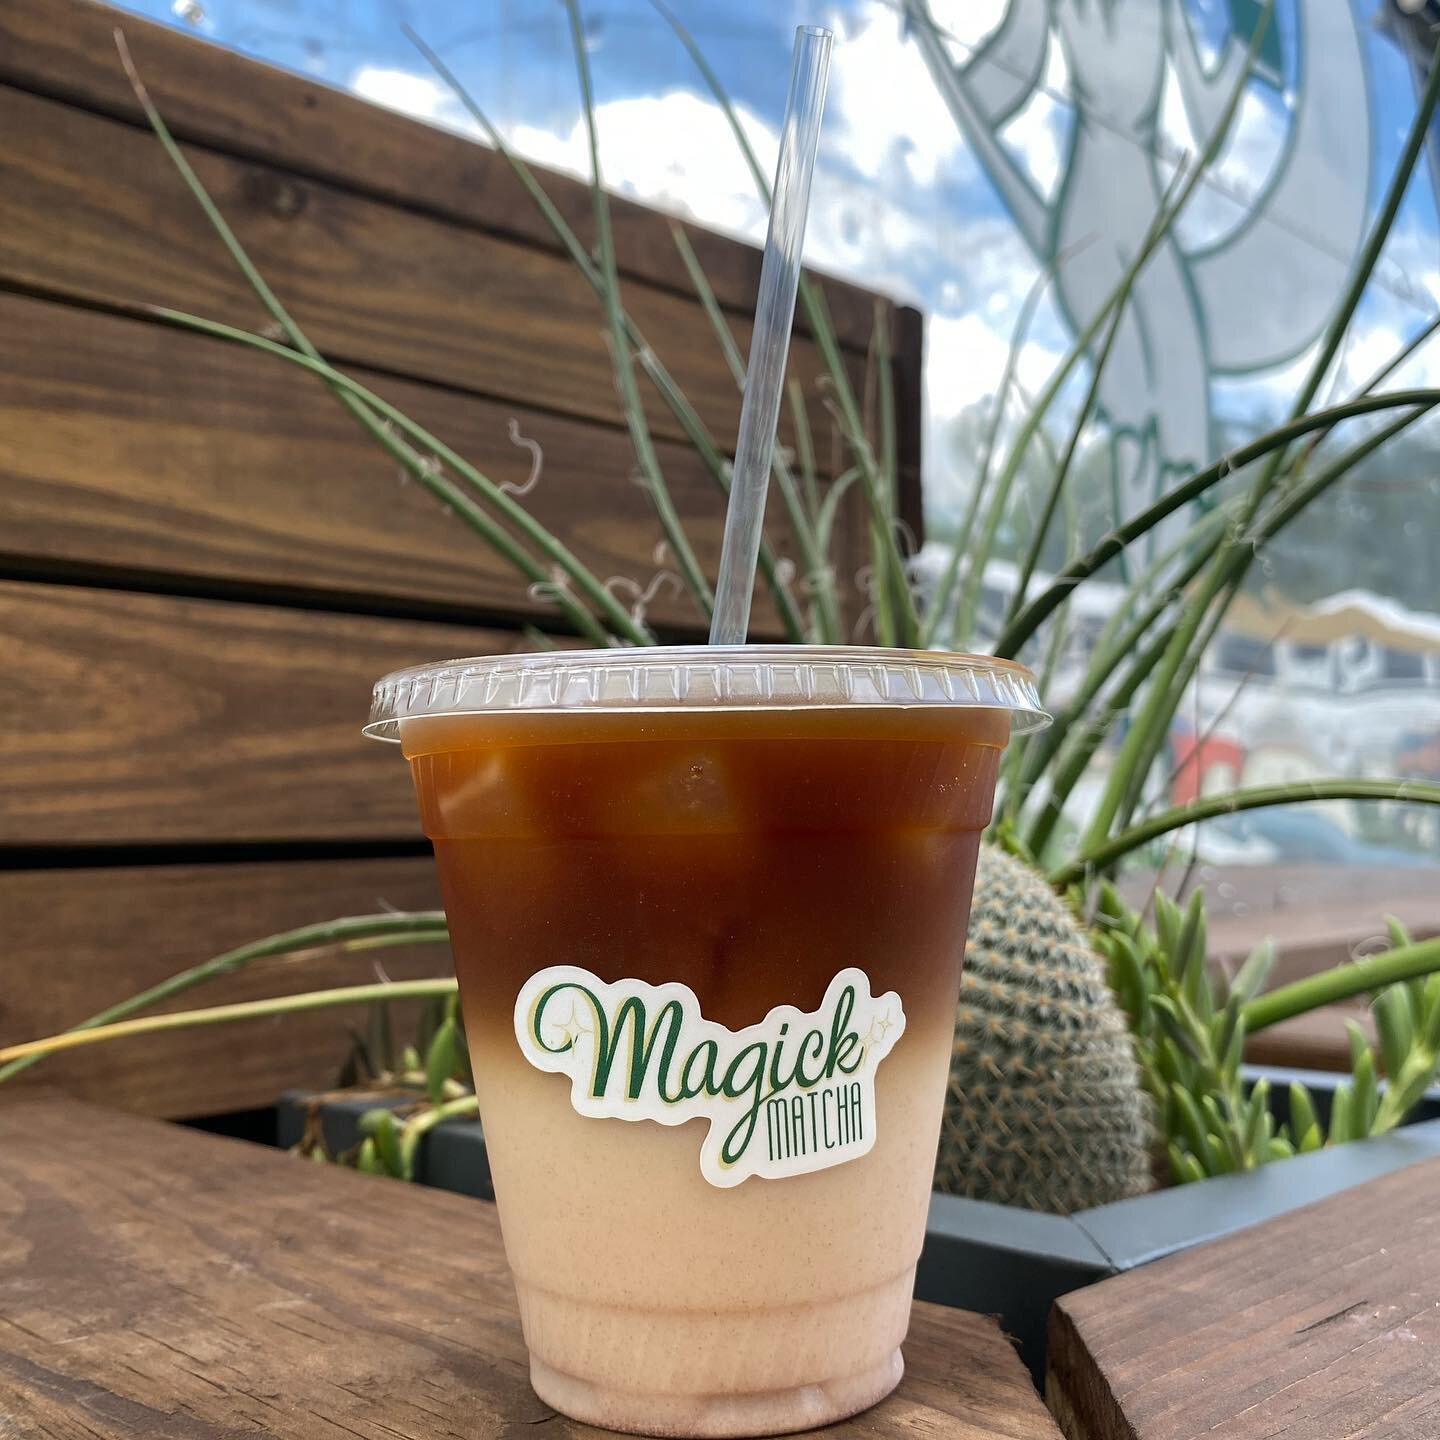 Our new La Matchata can also be served with cold brew instead of matcha 😏  or try it with both 😏 

#atxfoodtruck #matchalatte #austinmatcha